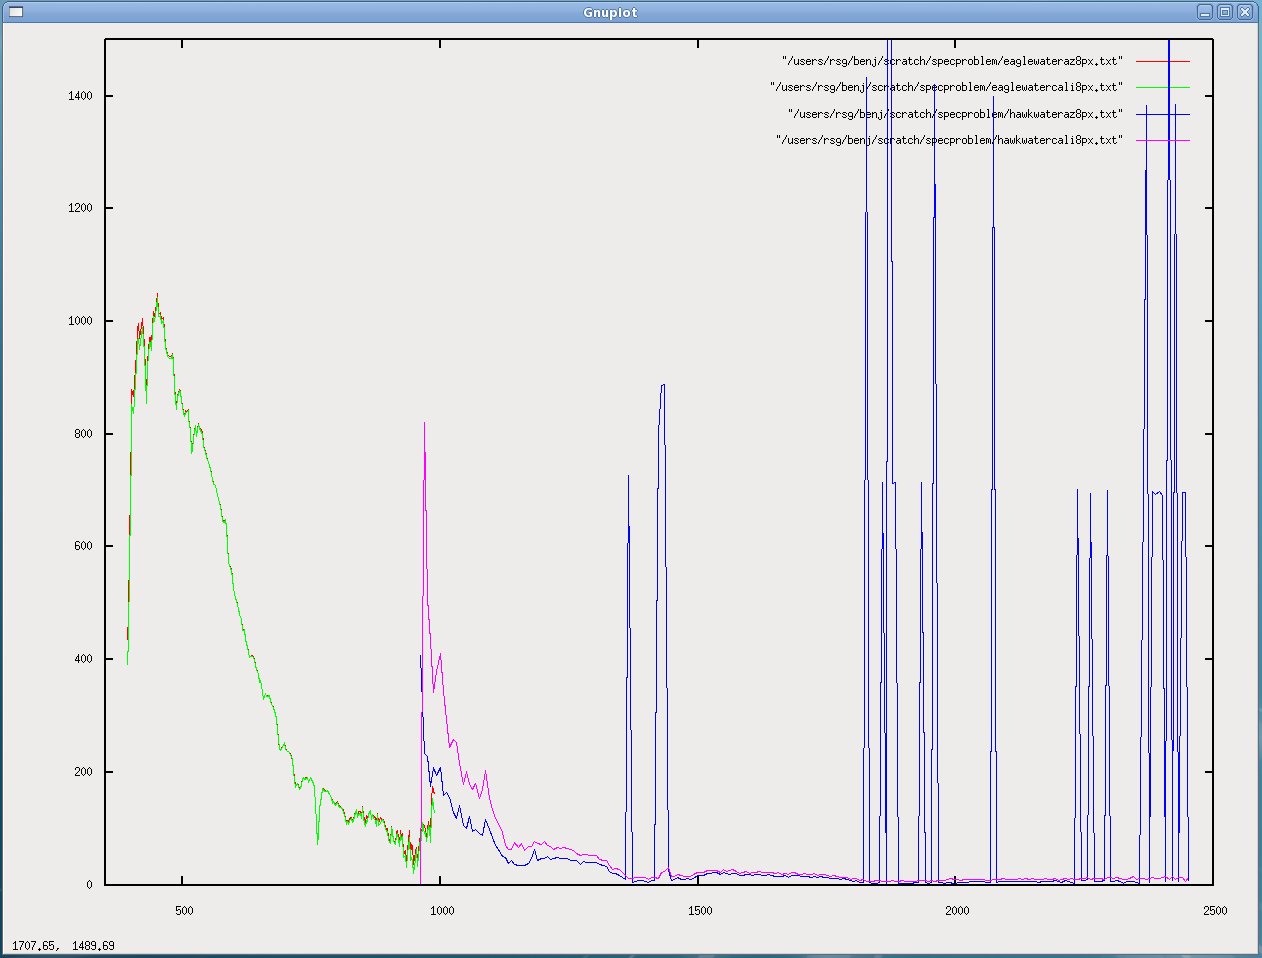 Azspec and caligeo output for Eagle and Hawk over water (8px average, Nigg Bay line 3, level 1 data)